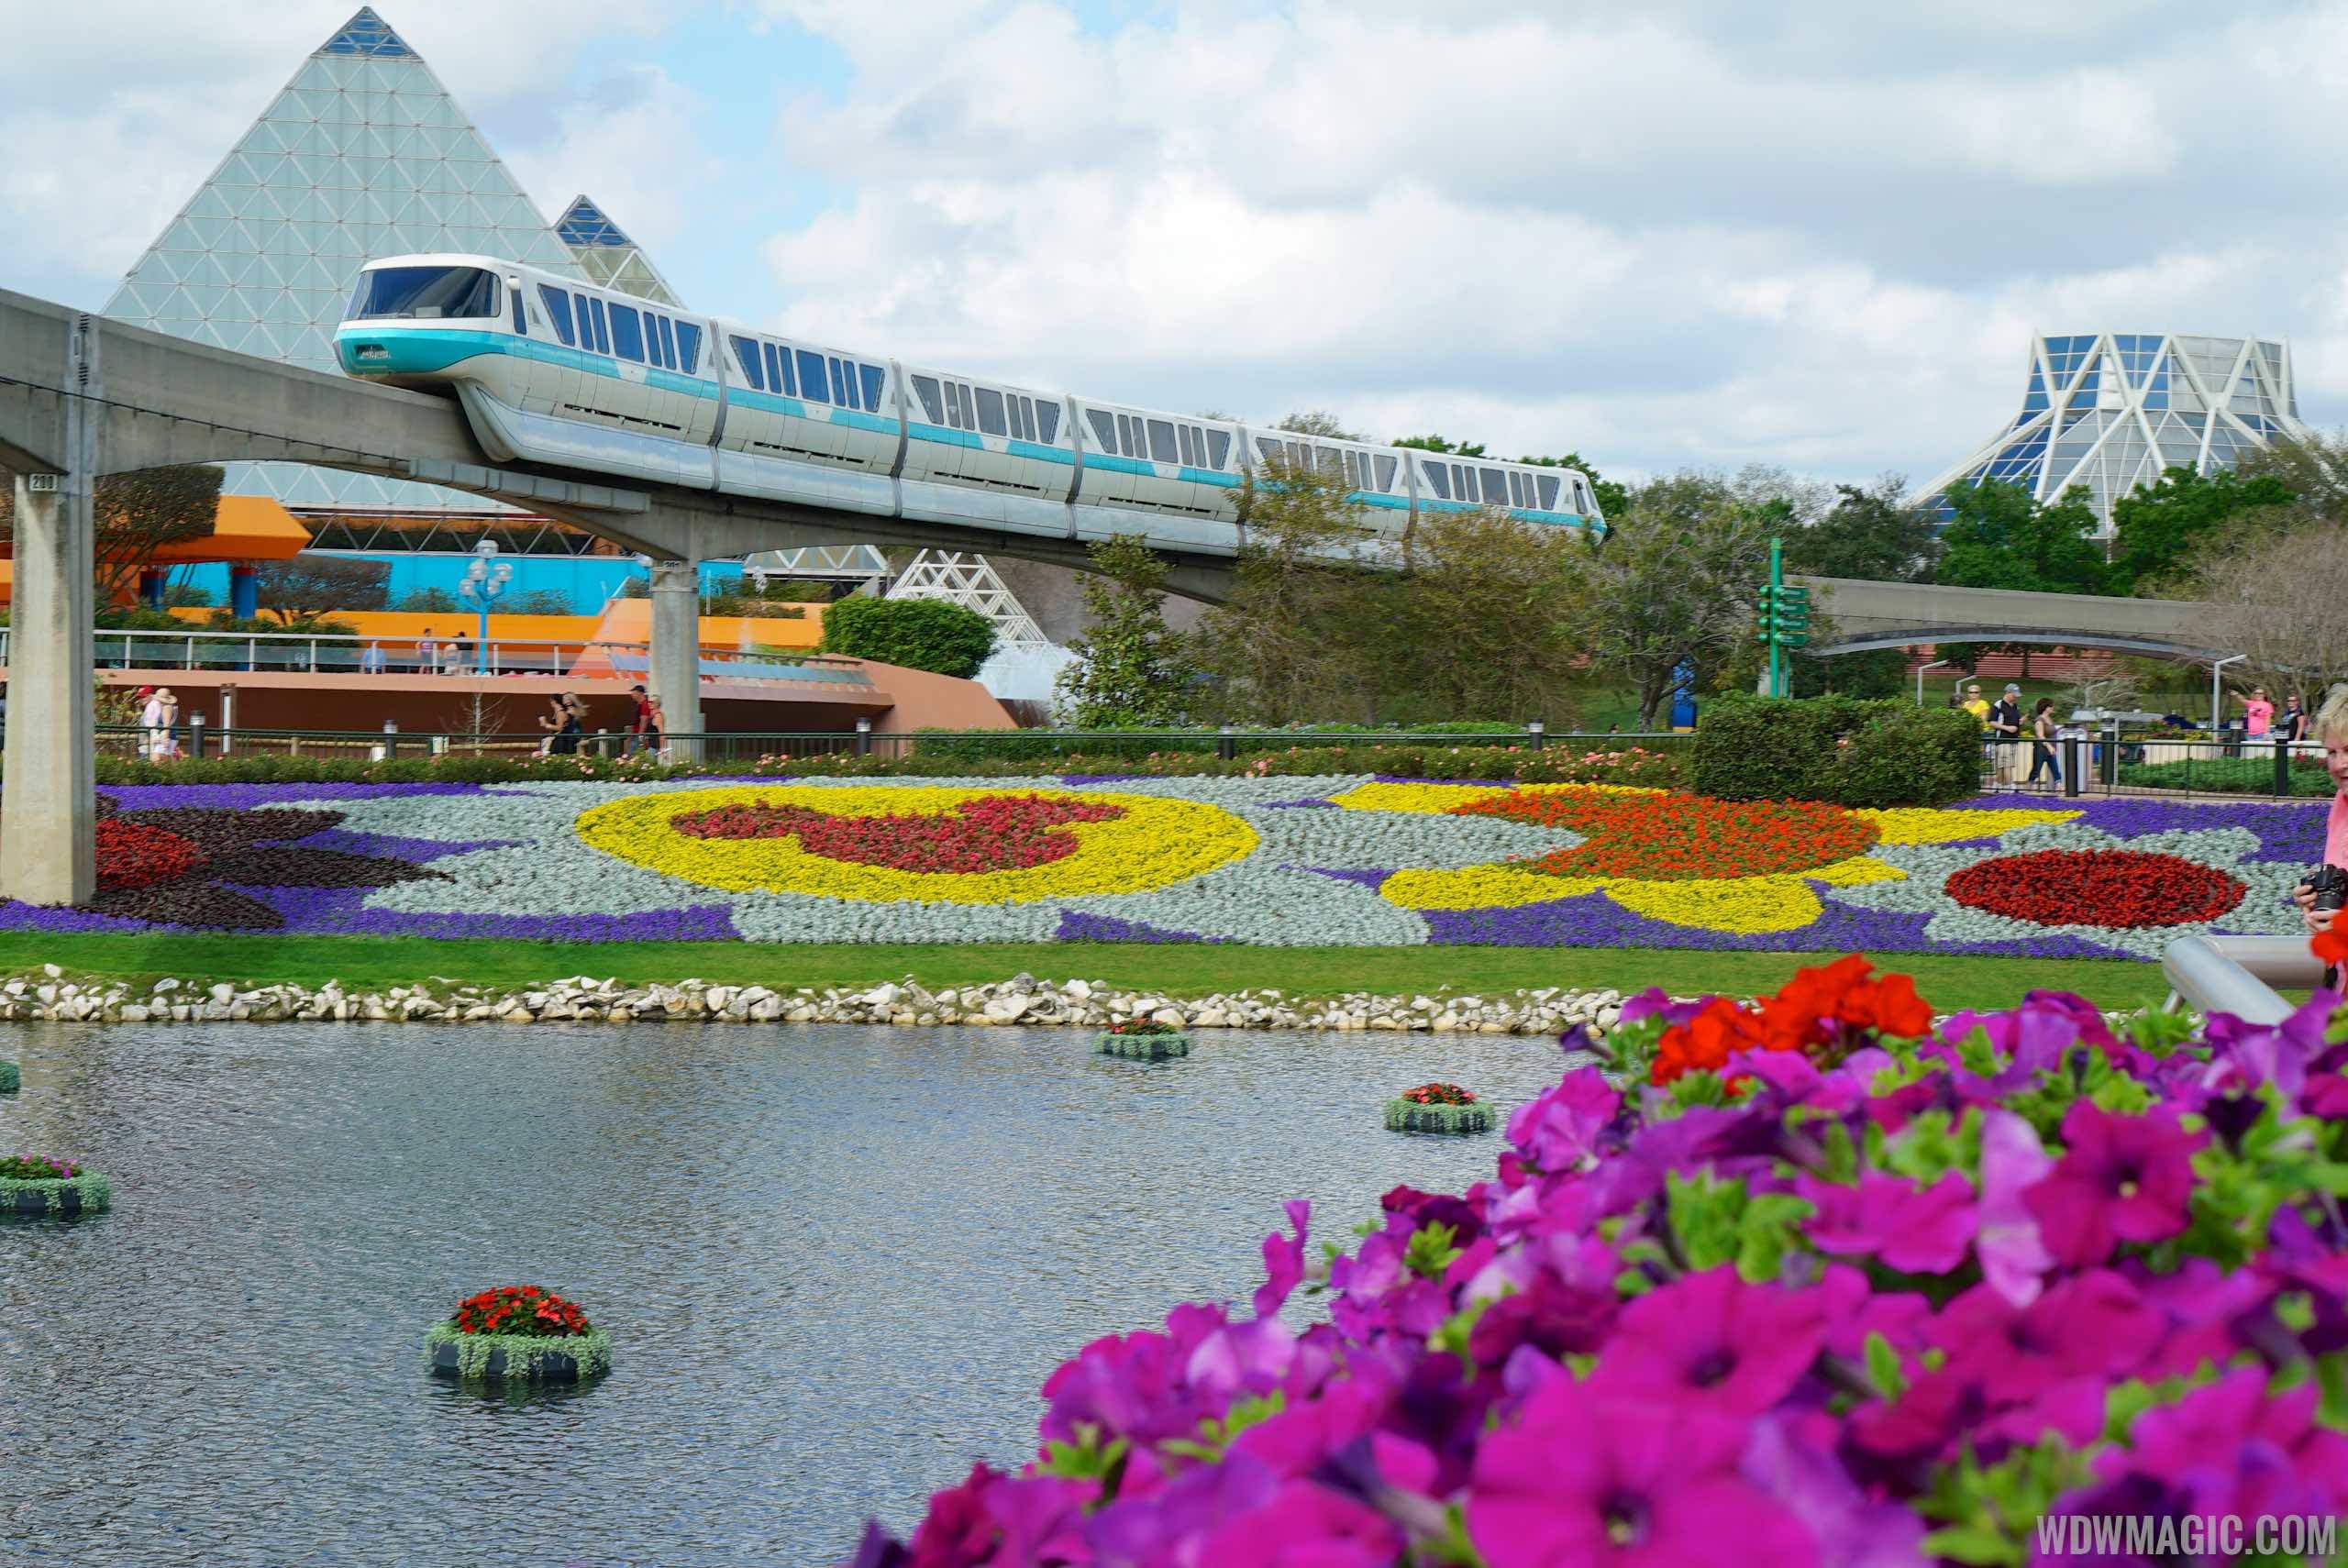 2015 Epcot International Flower and Garden Festival opening day tour